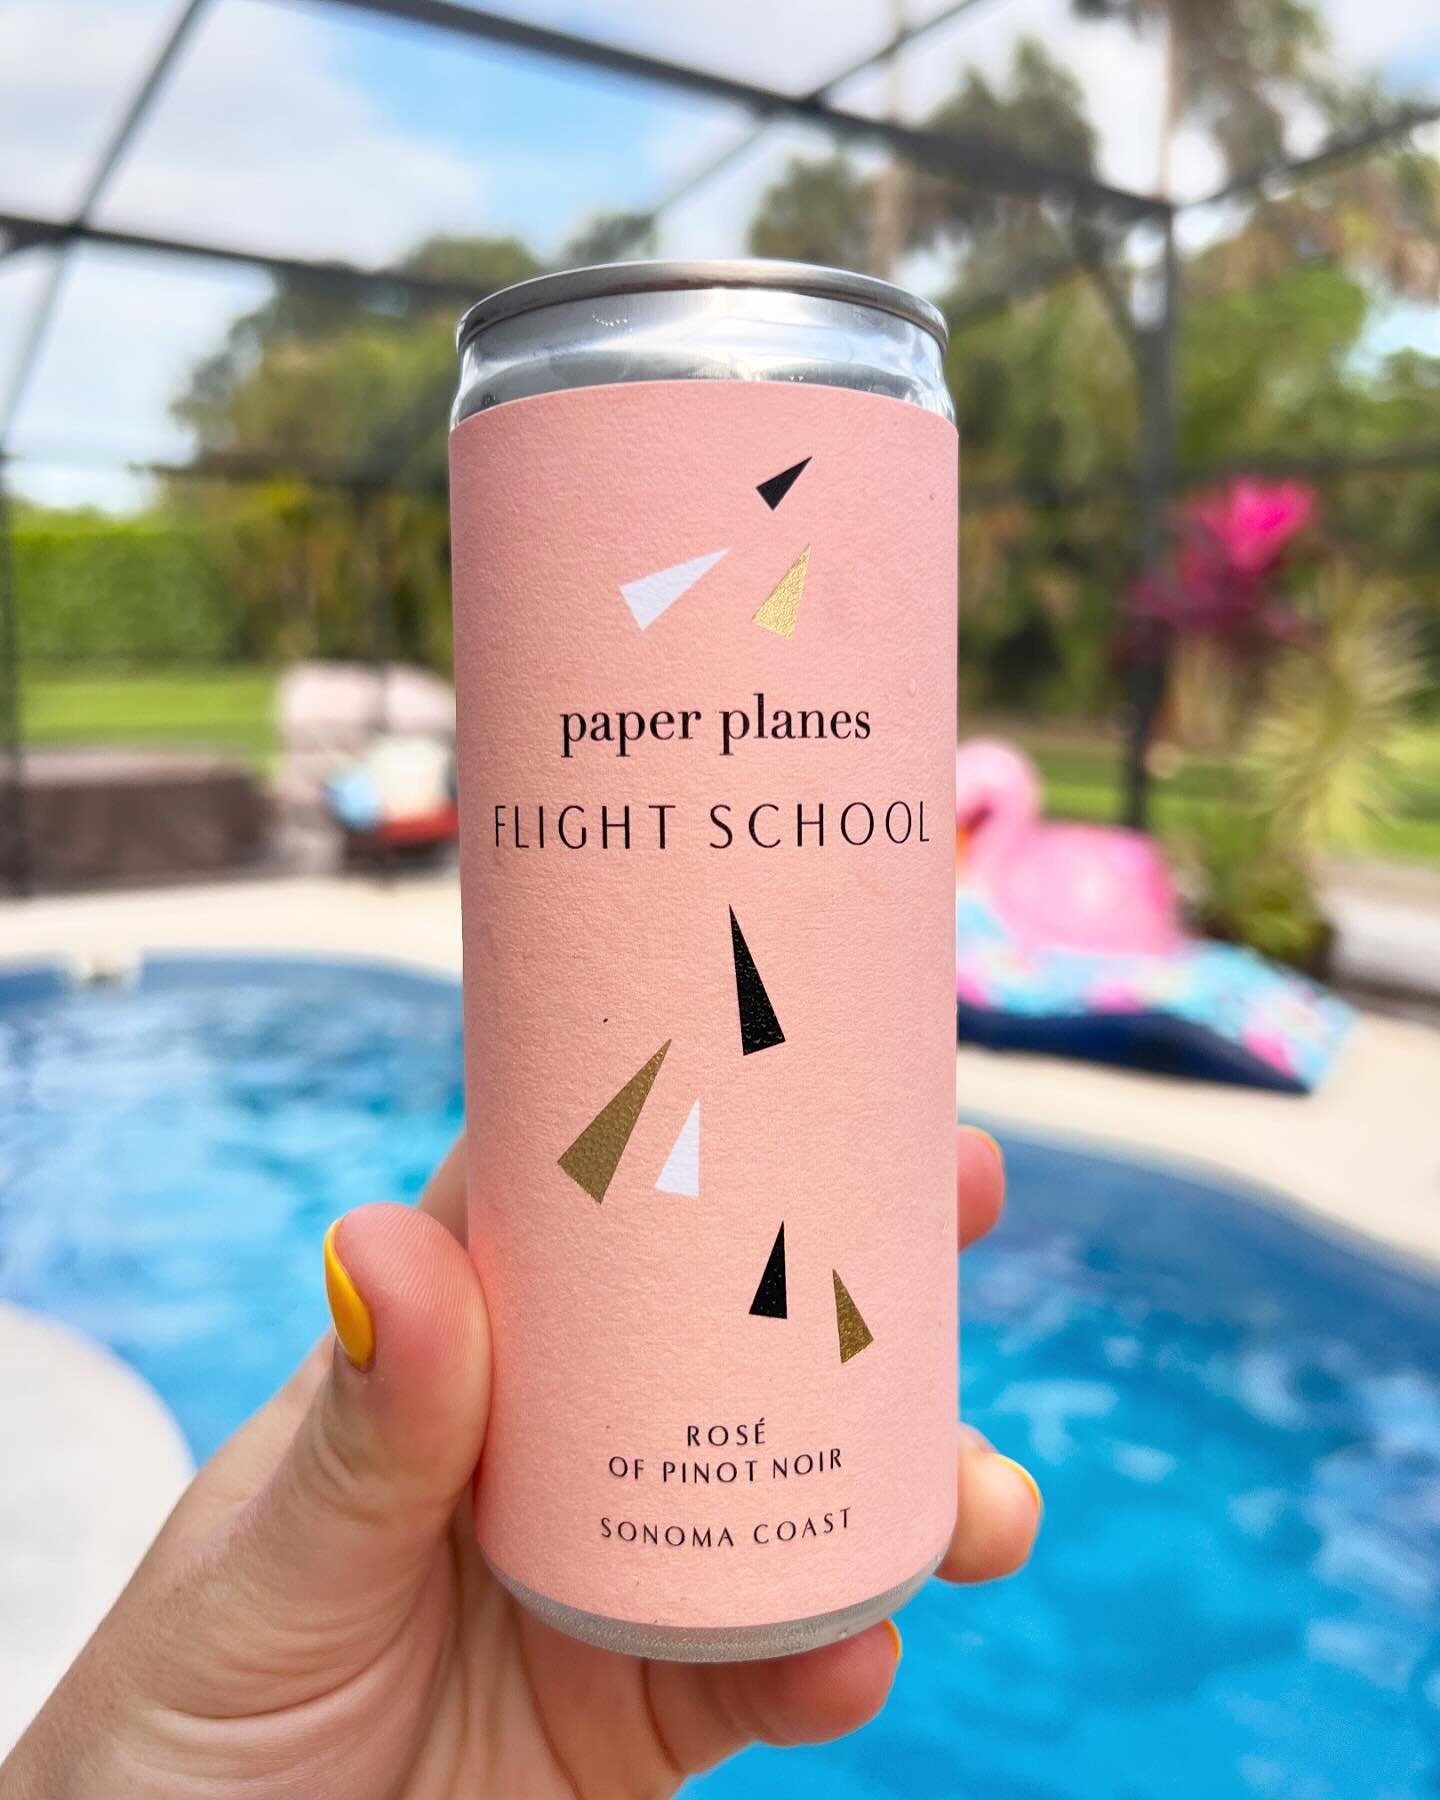 Happy Spring Break from Florida! Thank you all so much for the overwhelming support of our 2023 vintage release! We&rsquo;re celebrating today with some Flight School in the pool. Sending warm vibes to all our friends back in California! 😎